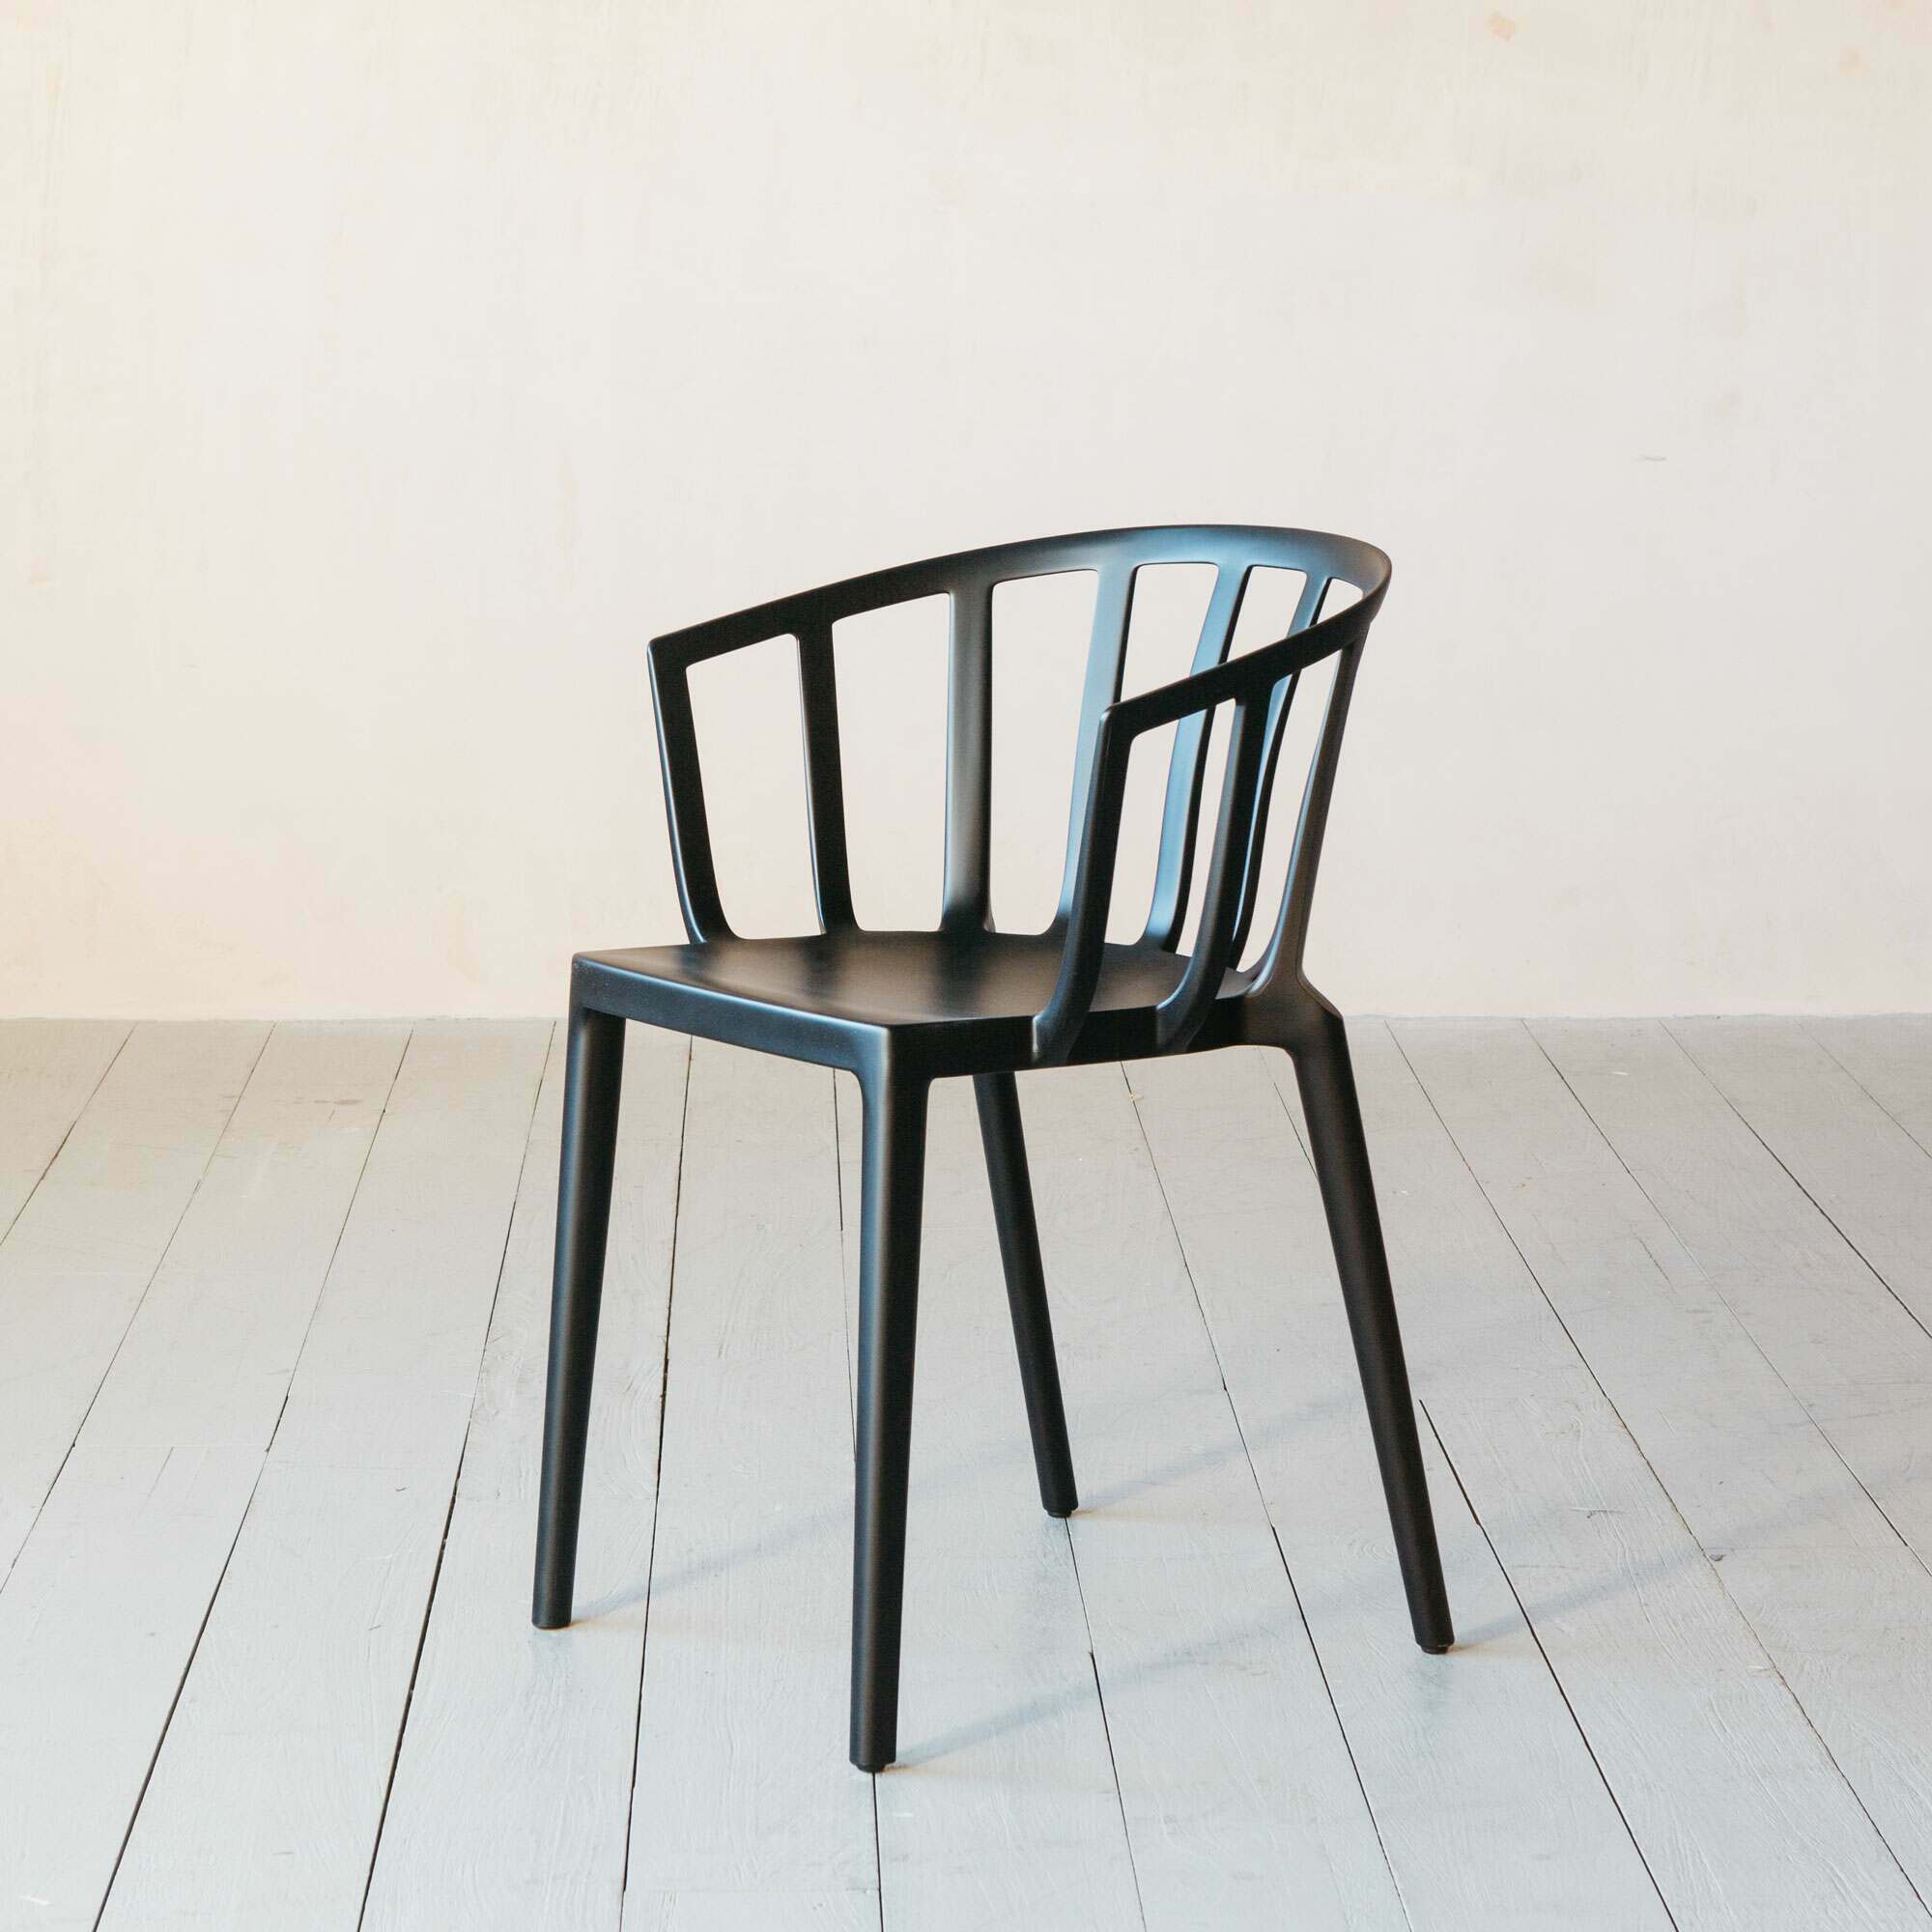 Read more about Graham and green kartell venice black matte chair